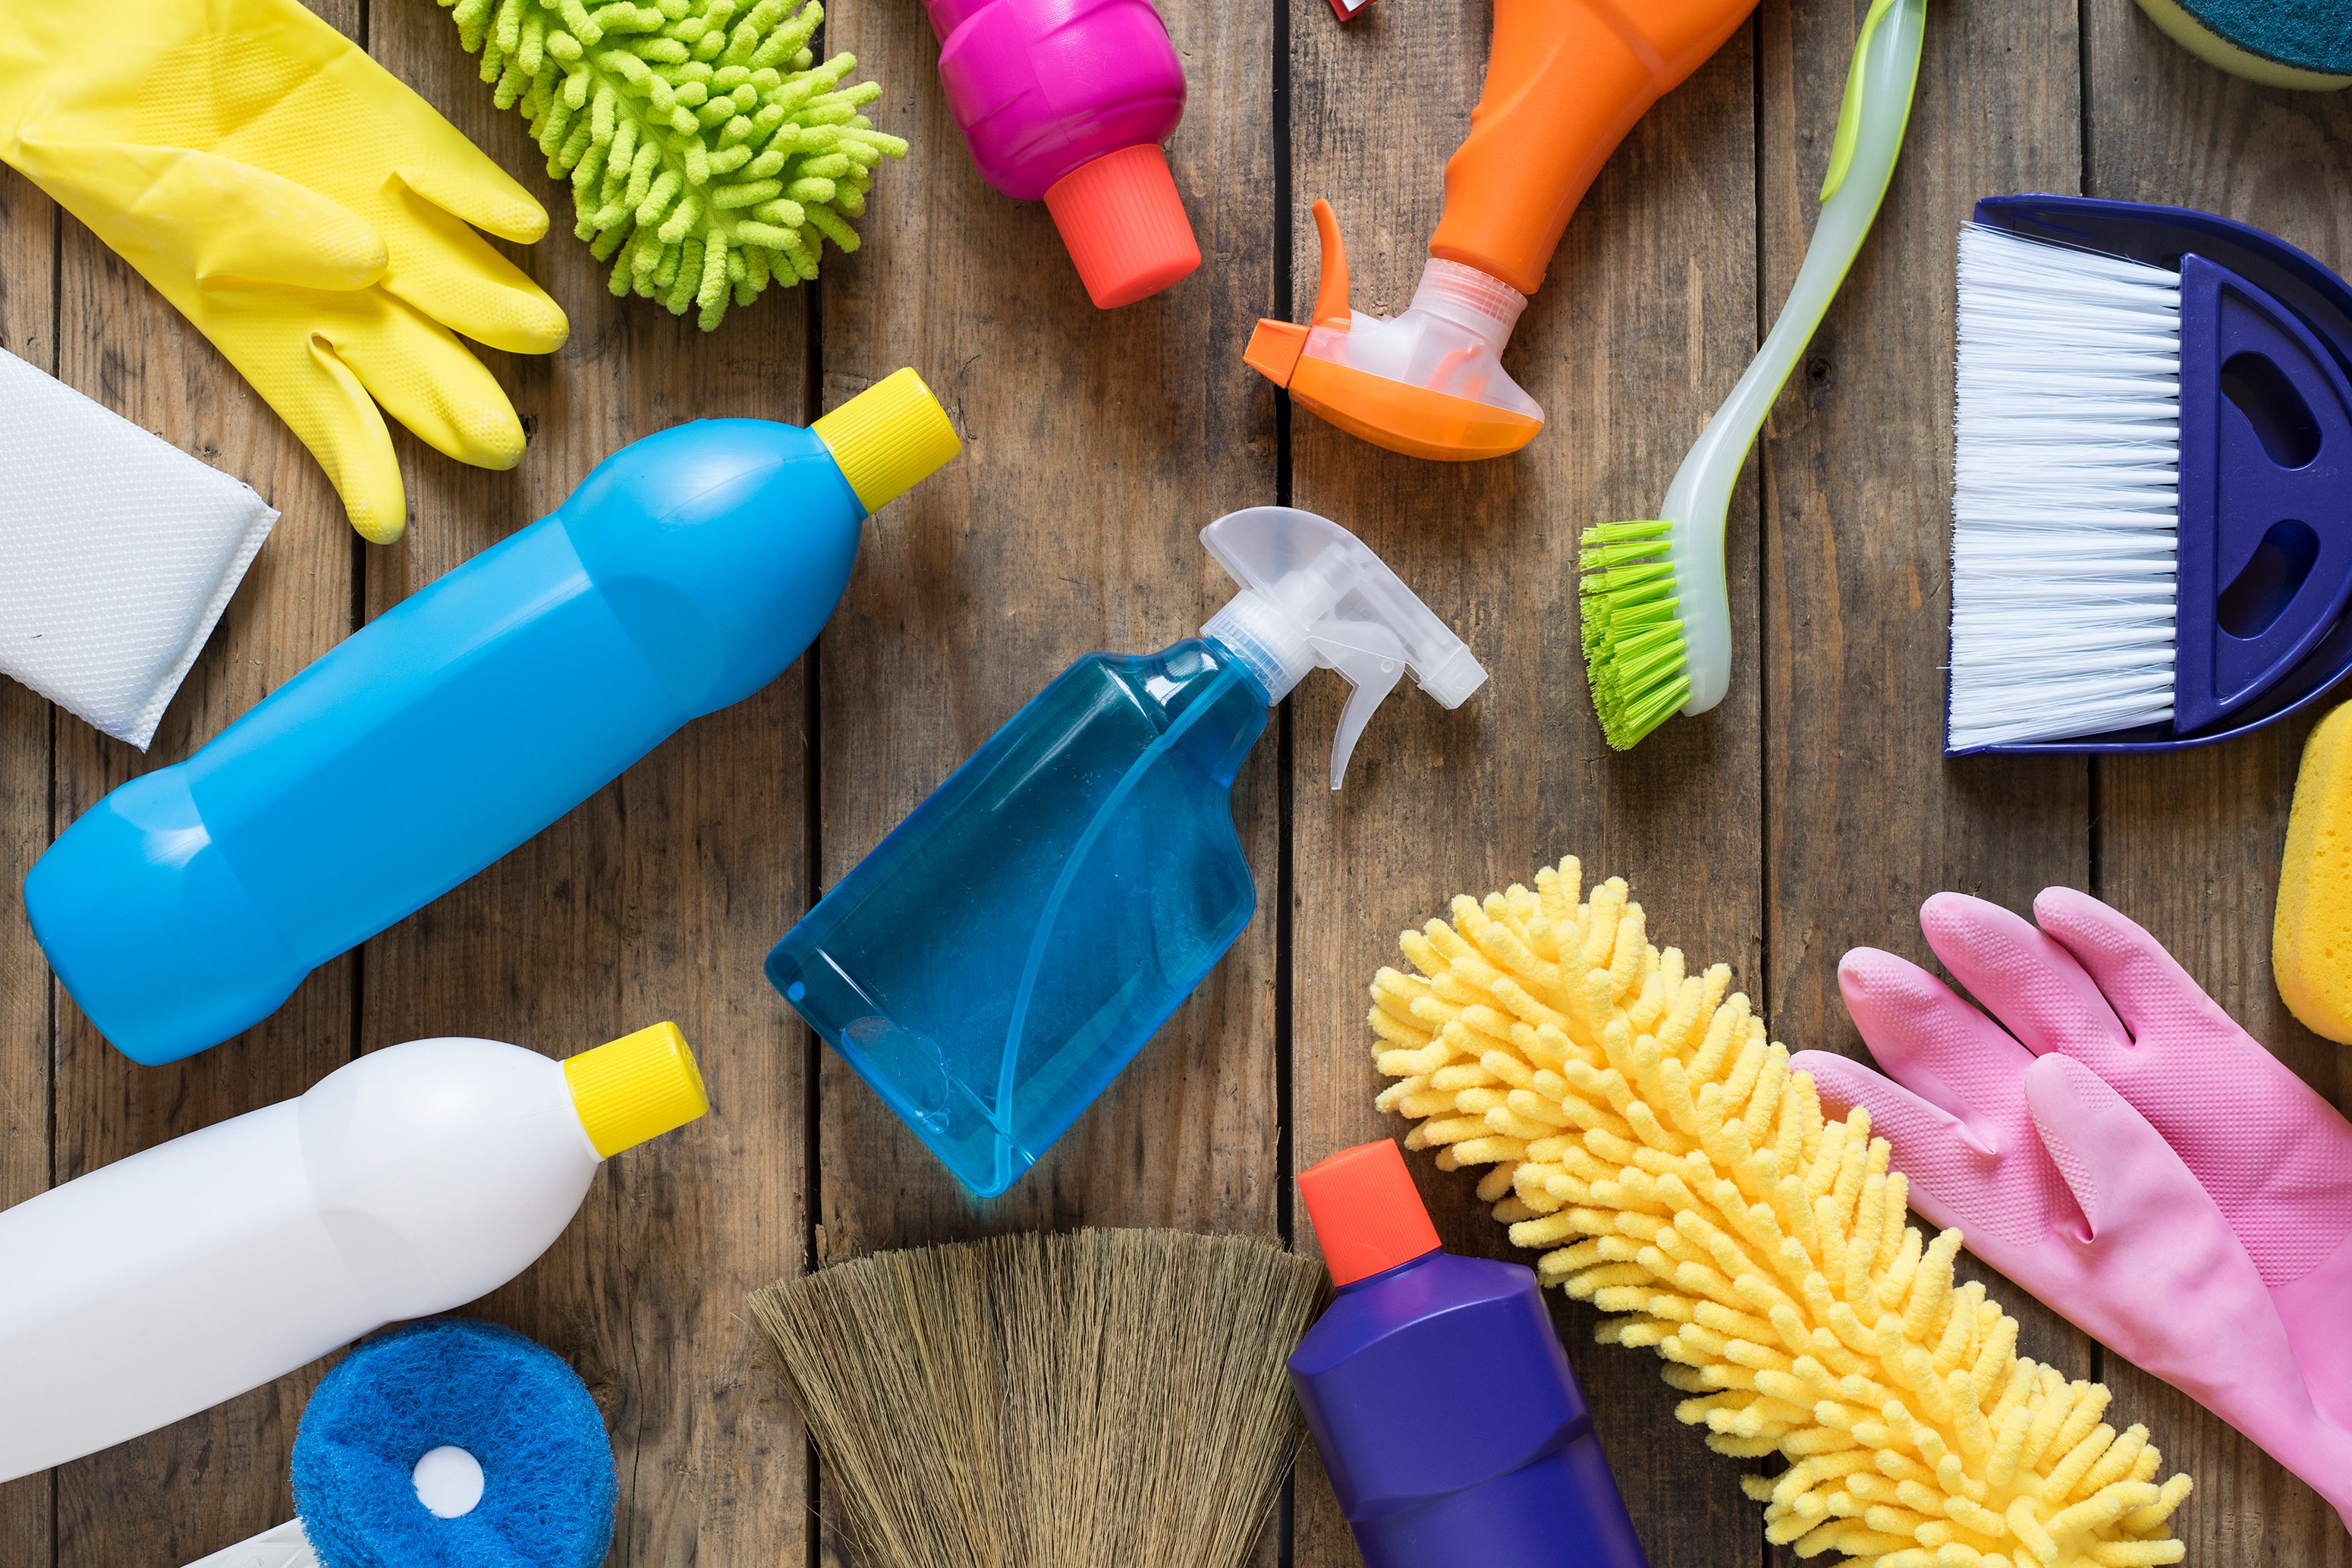 13 Dangerous Household Items You Should Quit Using Immediately